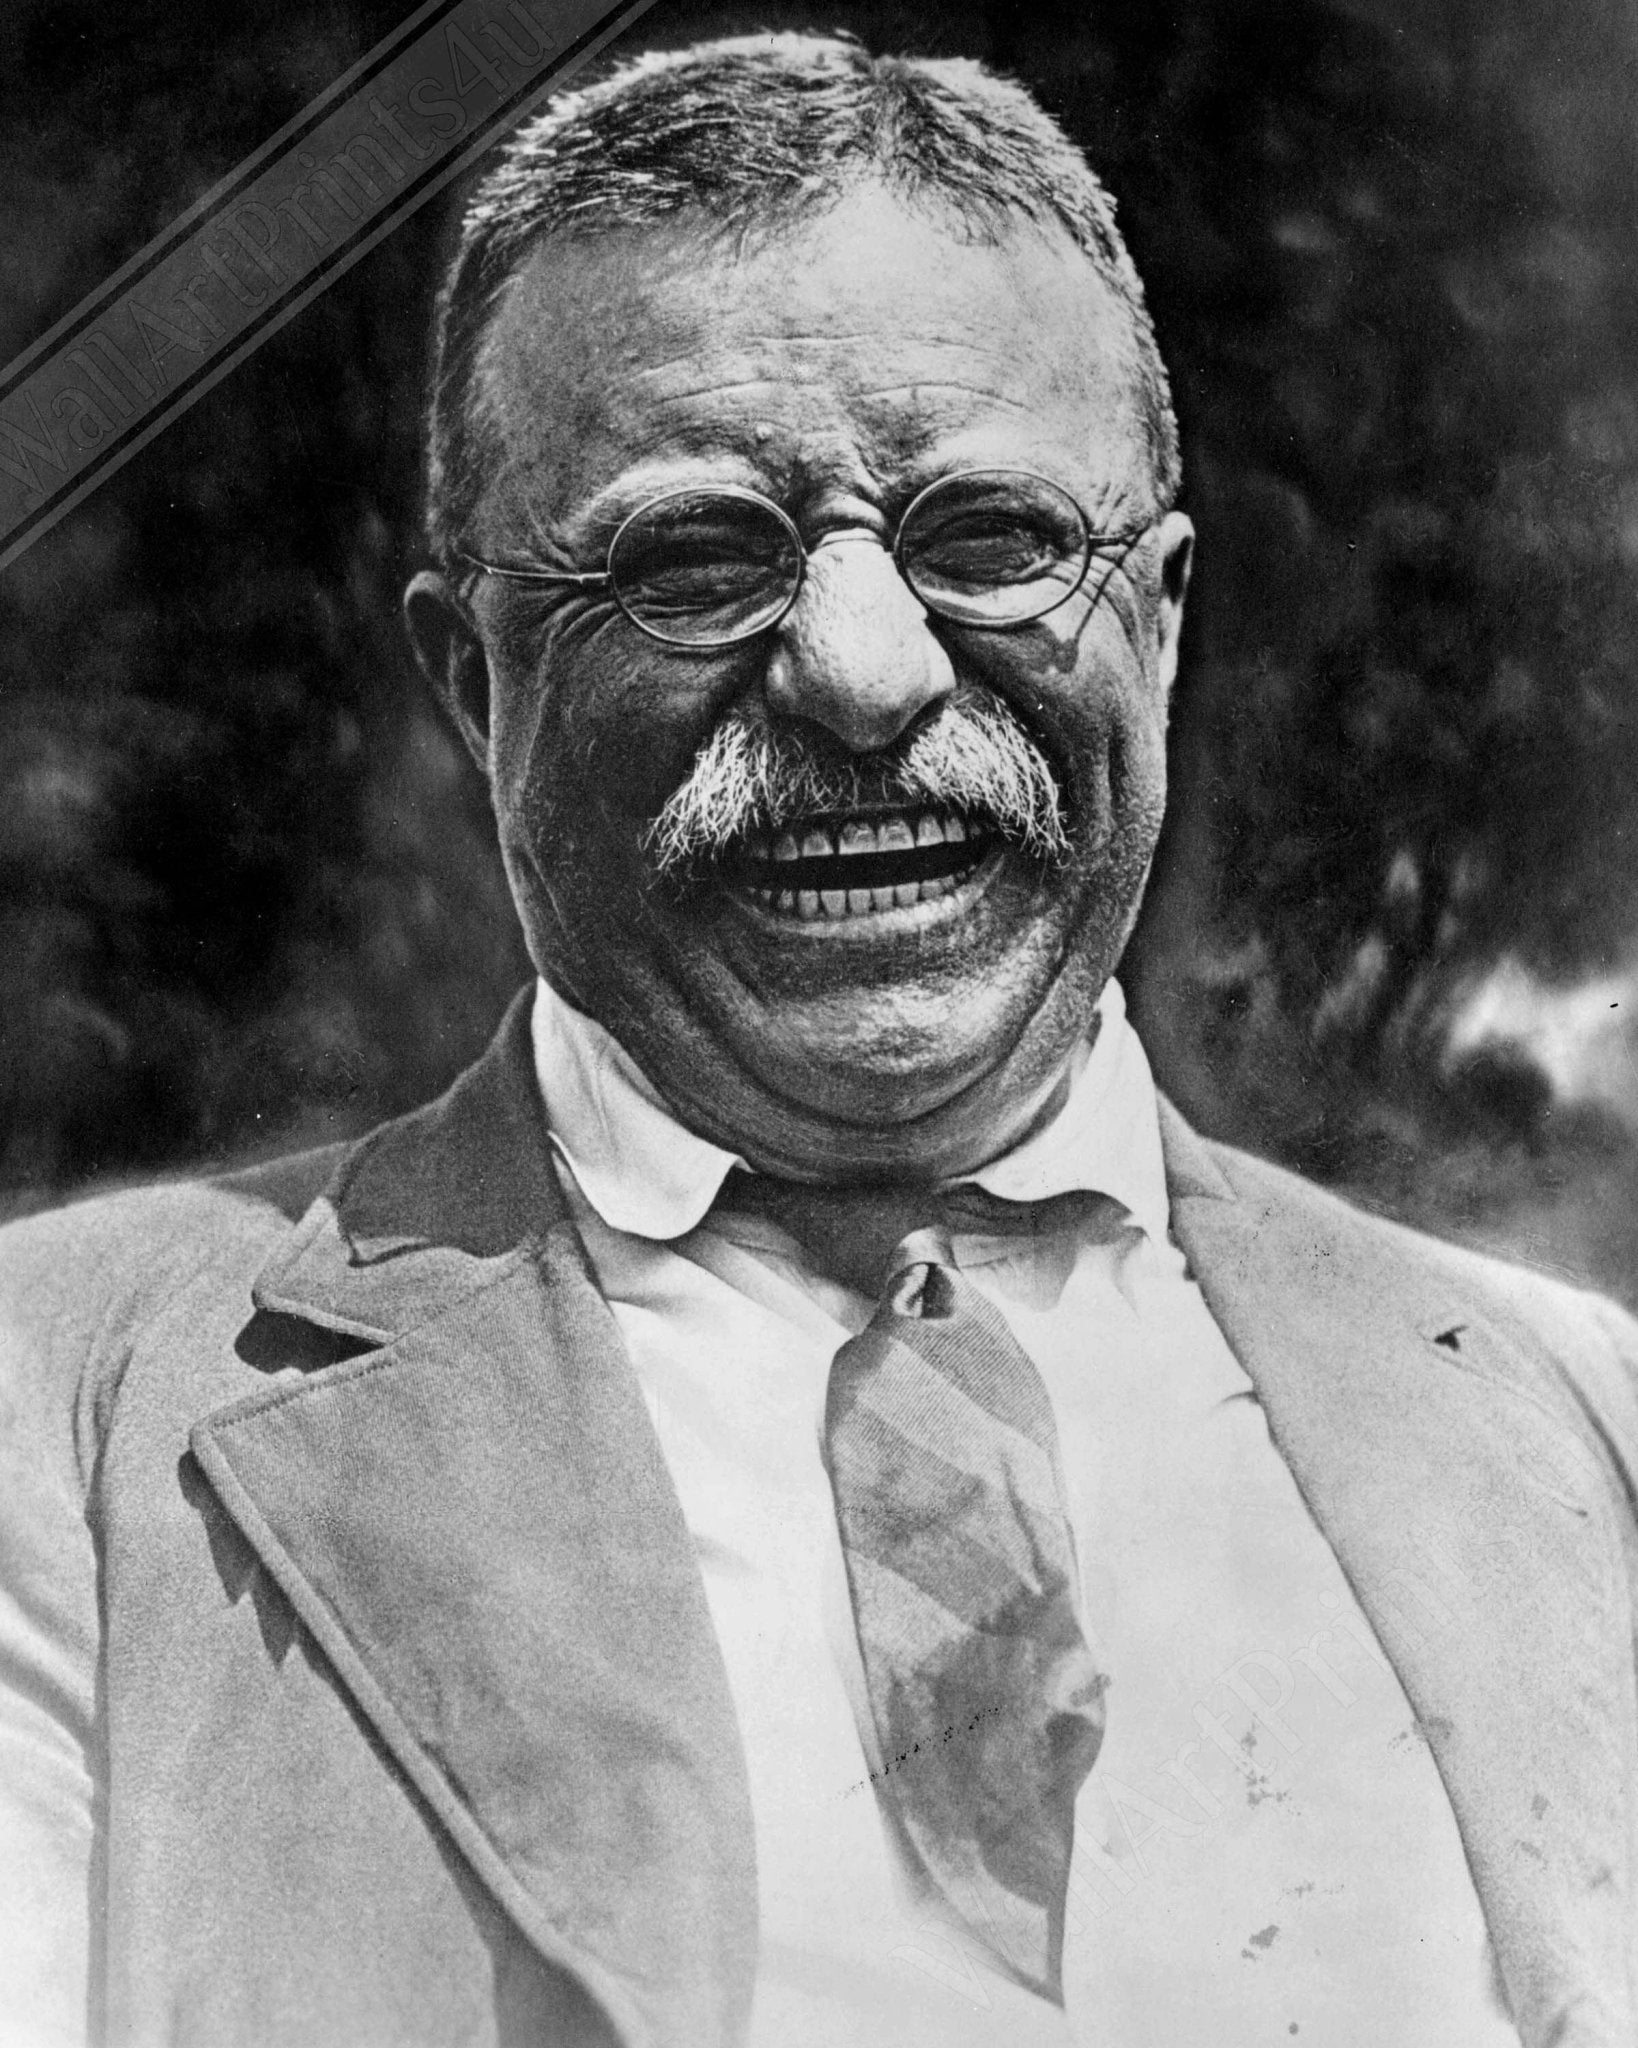 Teddy Roosevelt Canvas, Father Of The Teddy Bear, Vintage Photo Theodore Roosevelt Canvas Print Great White Chief - WallArtPrints4U